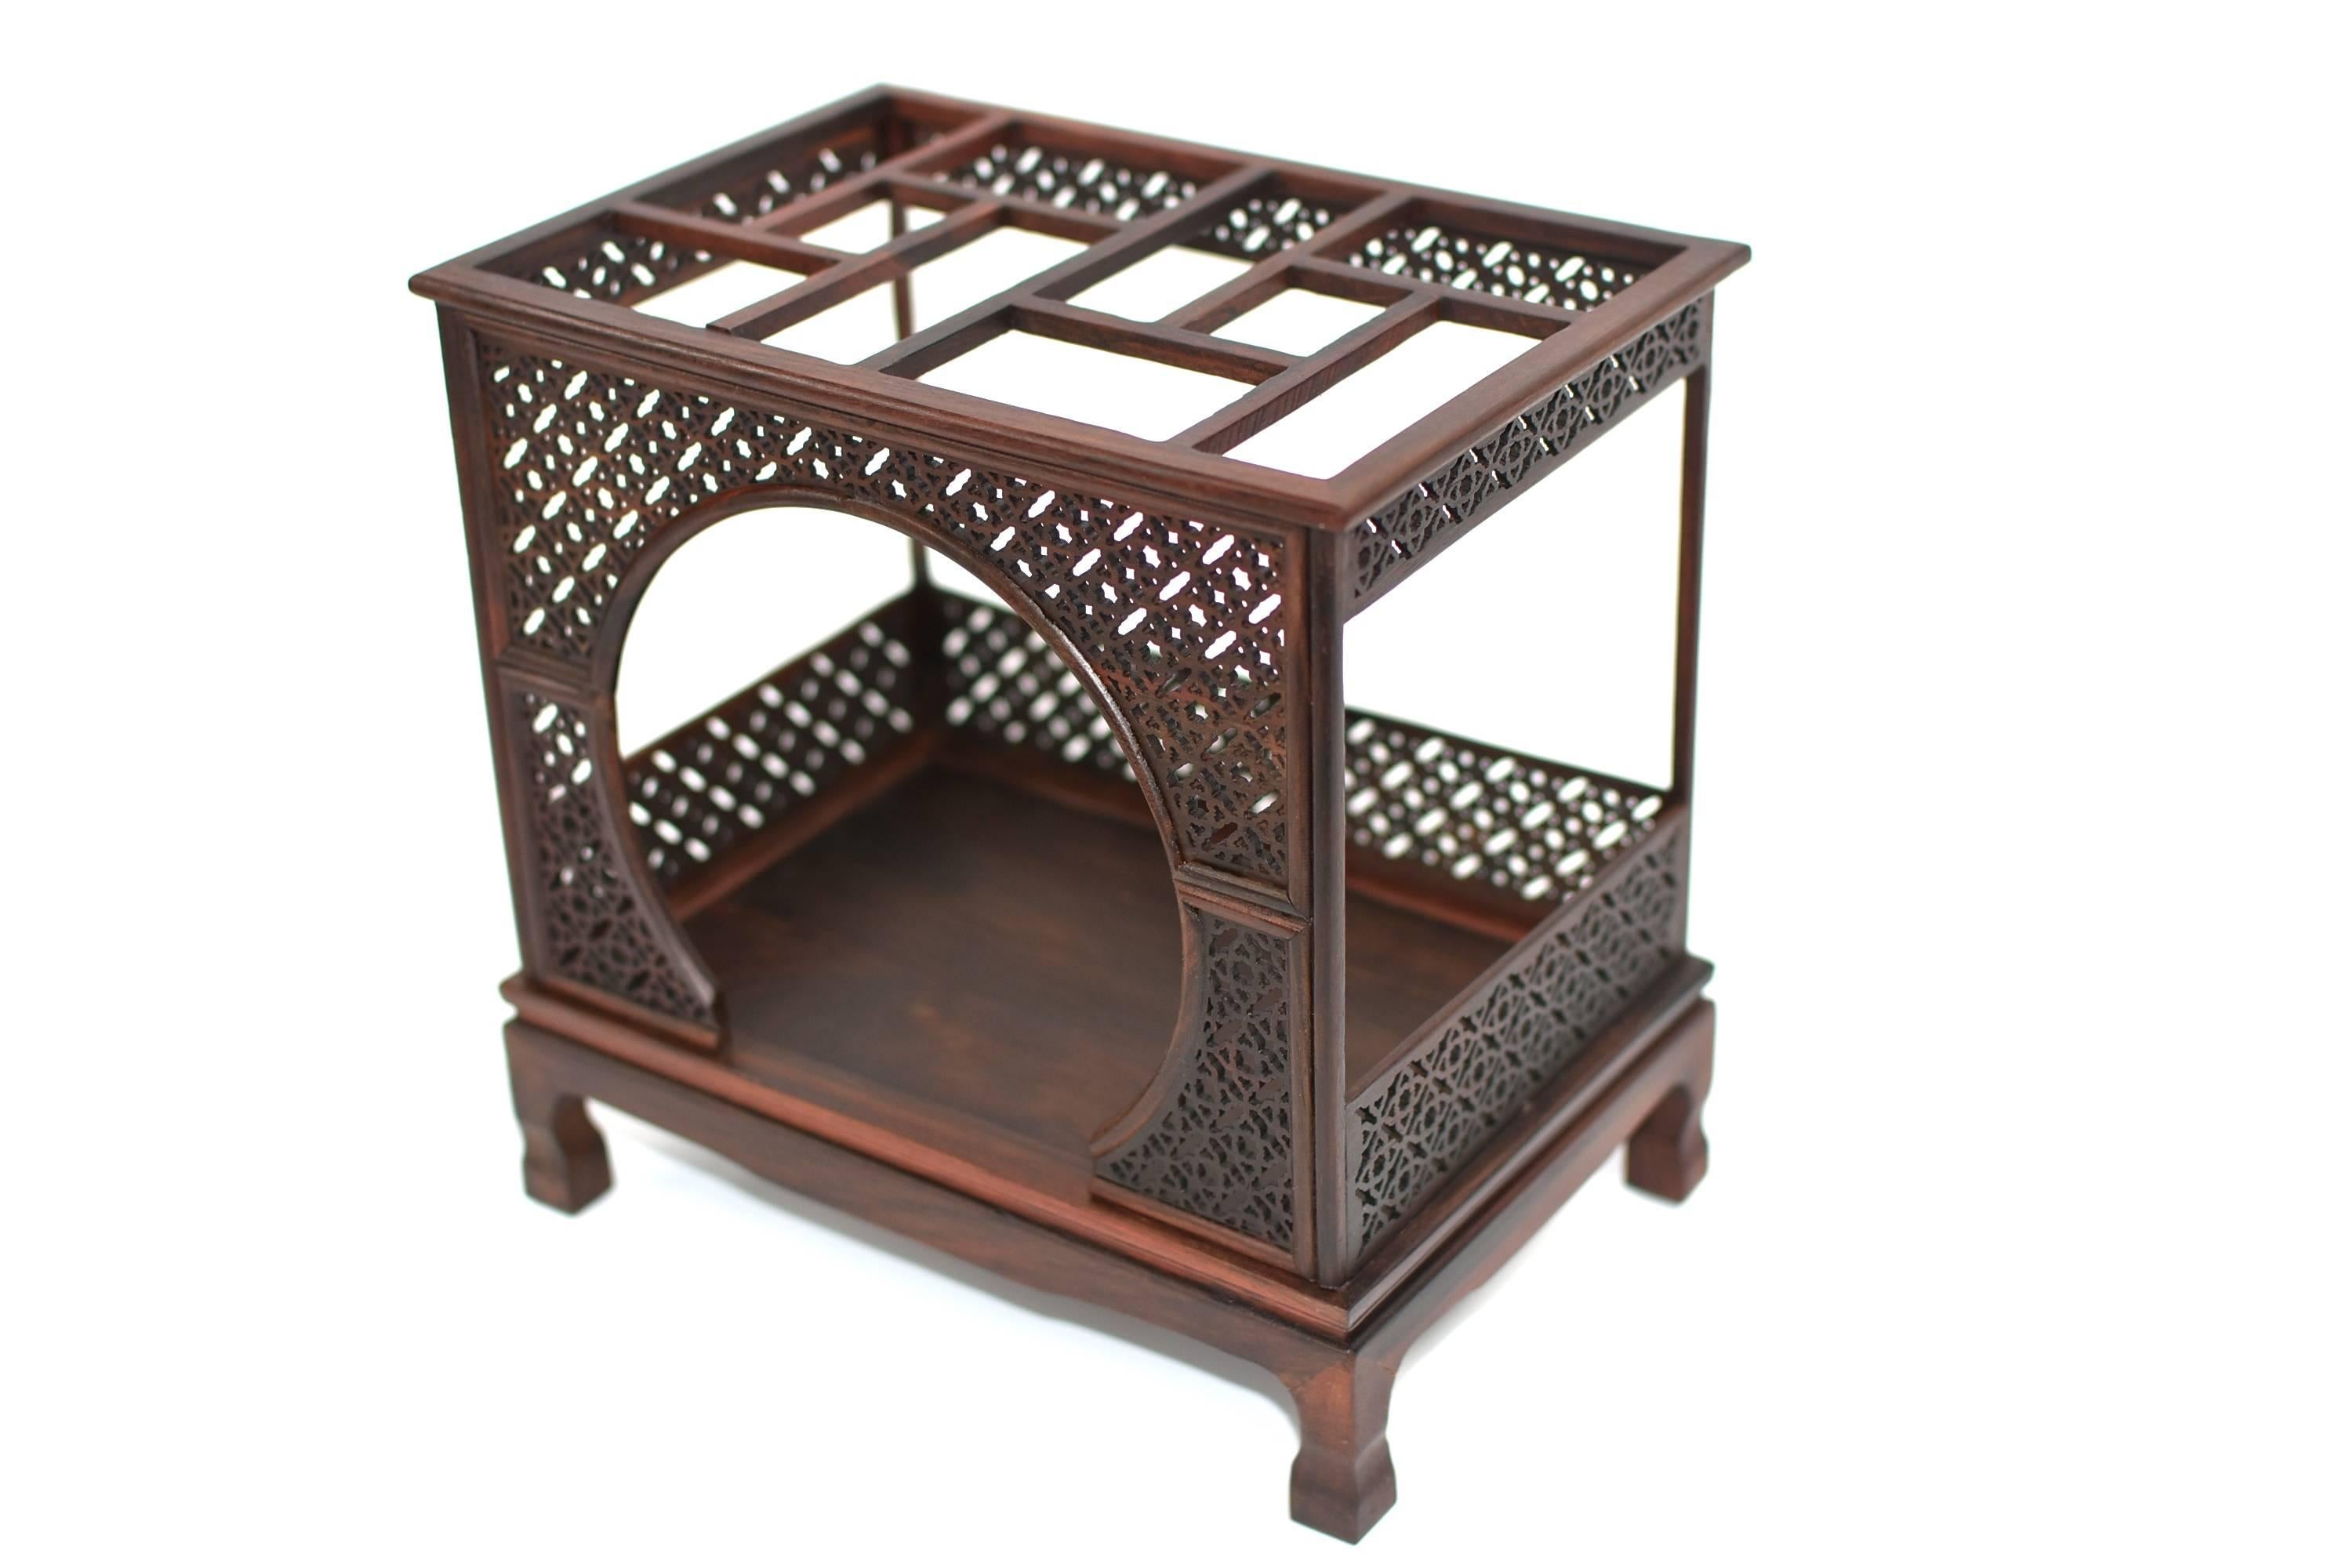 Mini Chinese Moon Bed, Rosewood Model of Bed 2